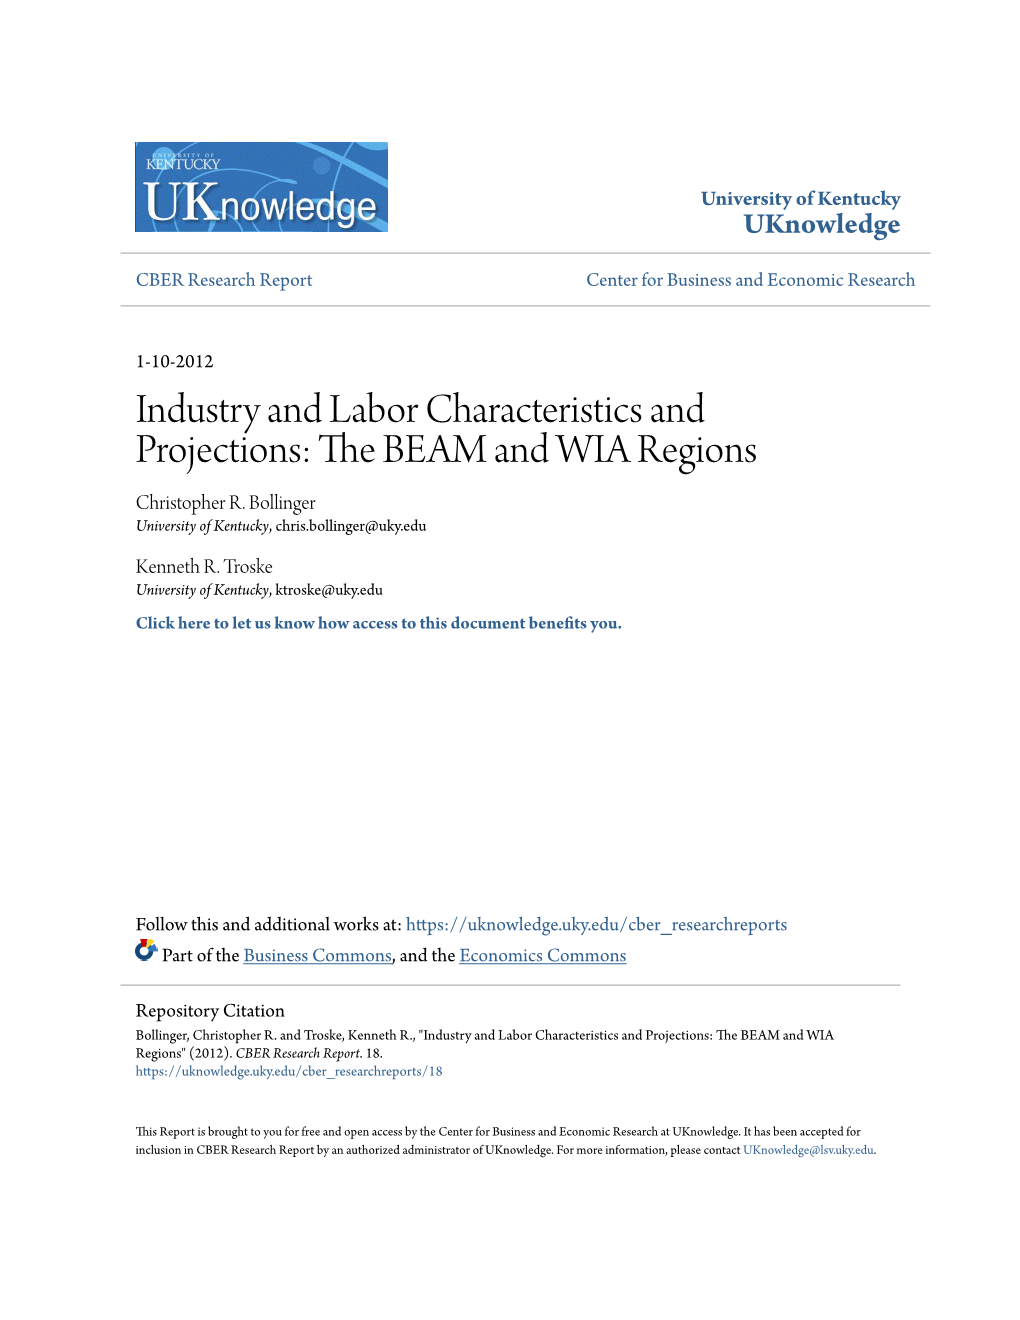 Industry and Labor Characteristics and Projections: the BEAM and WIA Regions Christopher R